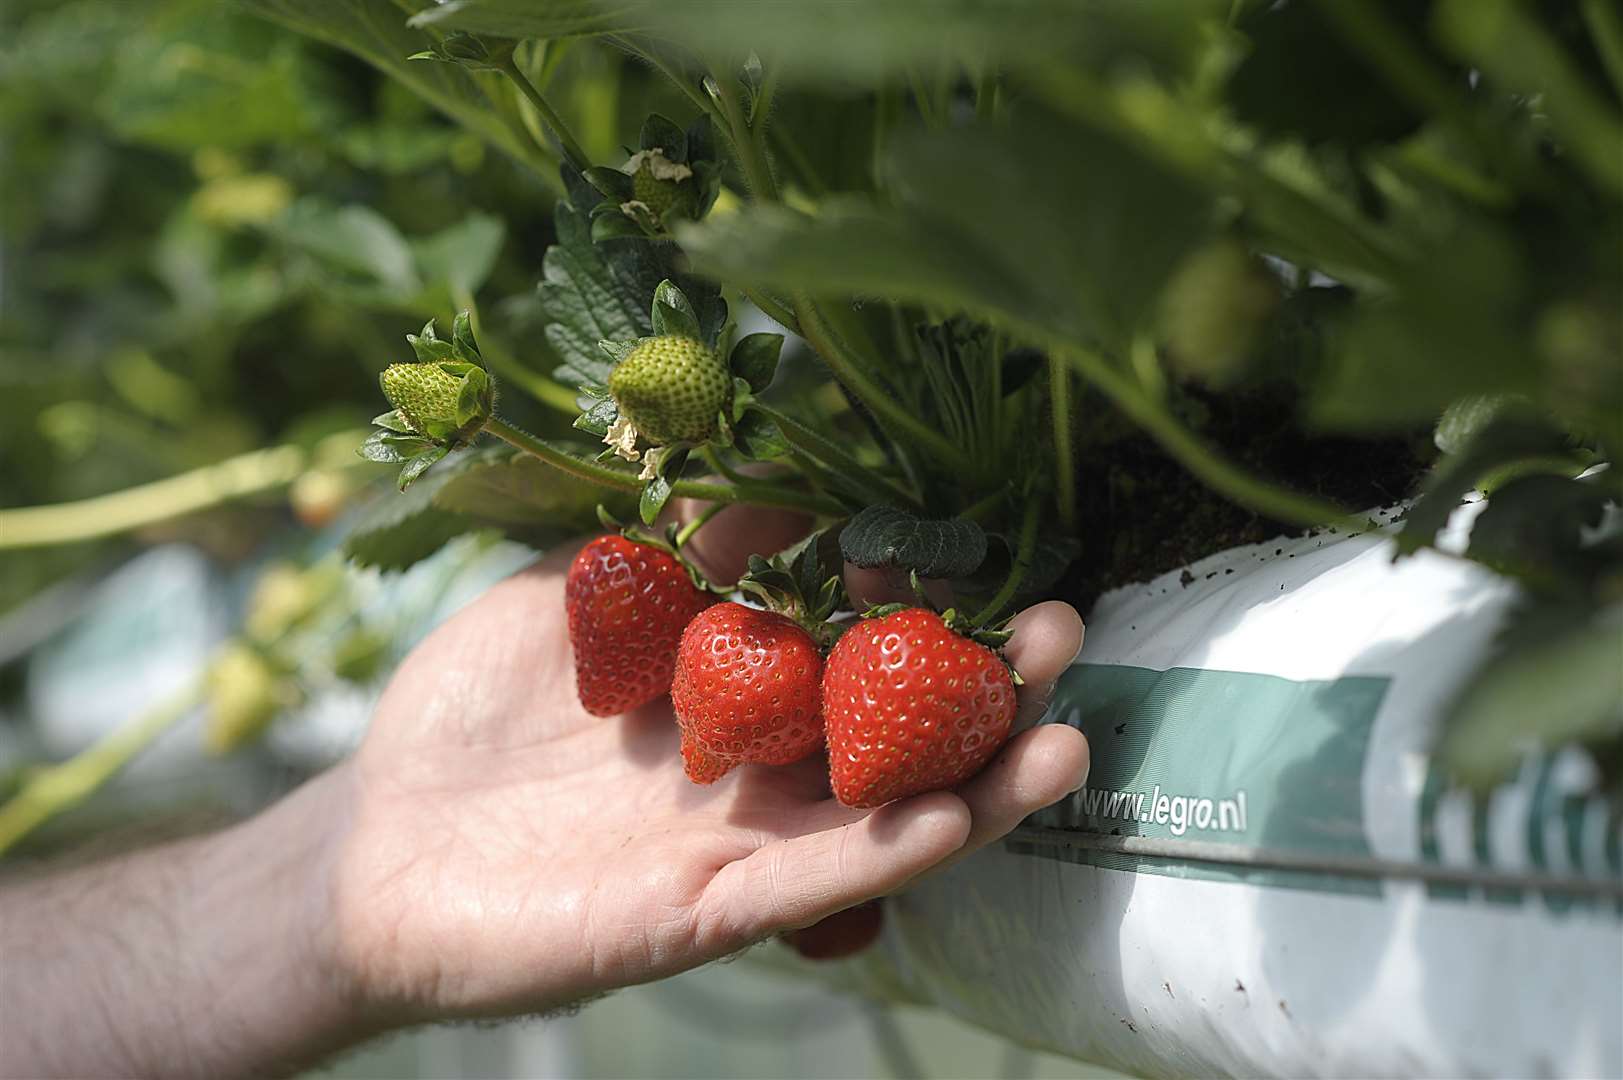 Clock House Farm has seen 550 more British applications for fruit picking this year - from their usual 50 applications